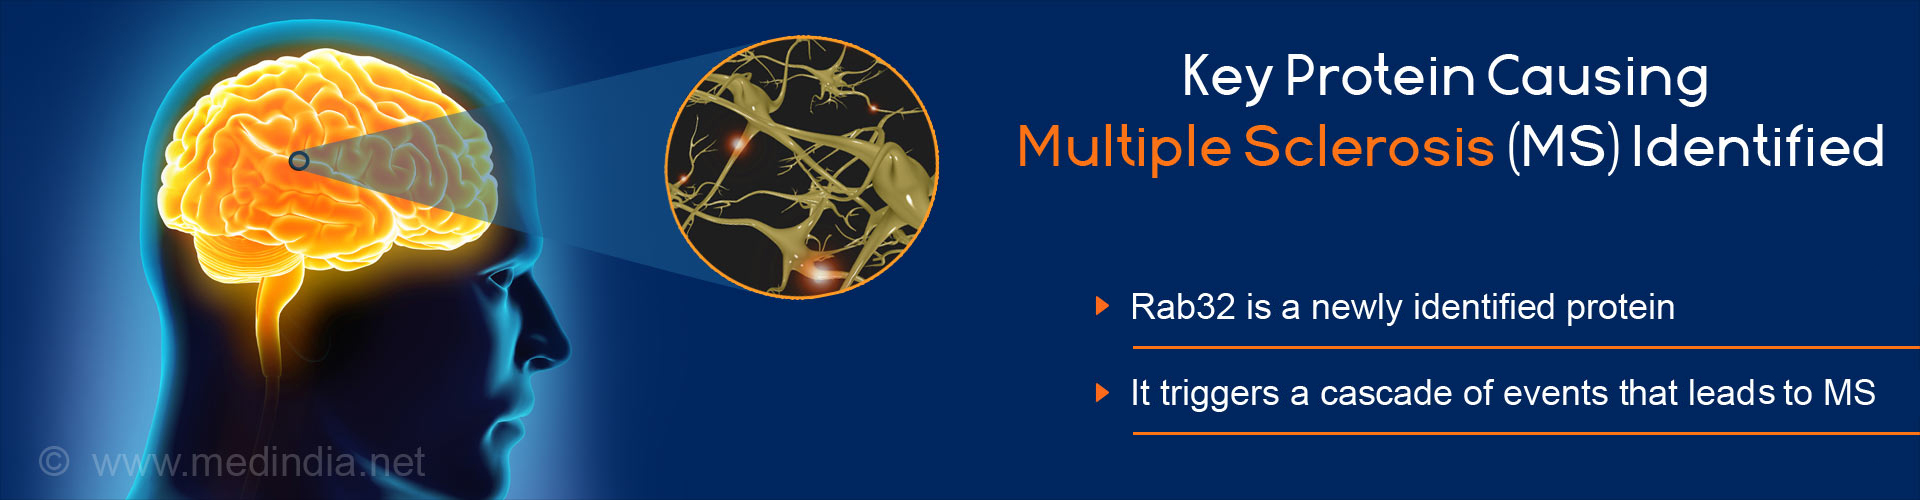 Key protein causing multiple sclerosis(ms) identified
- Rab32 is a newly identified protein
- It triggers a cascade of event that leads to ms